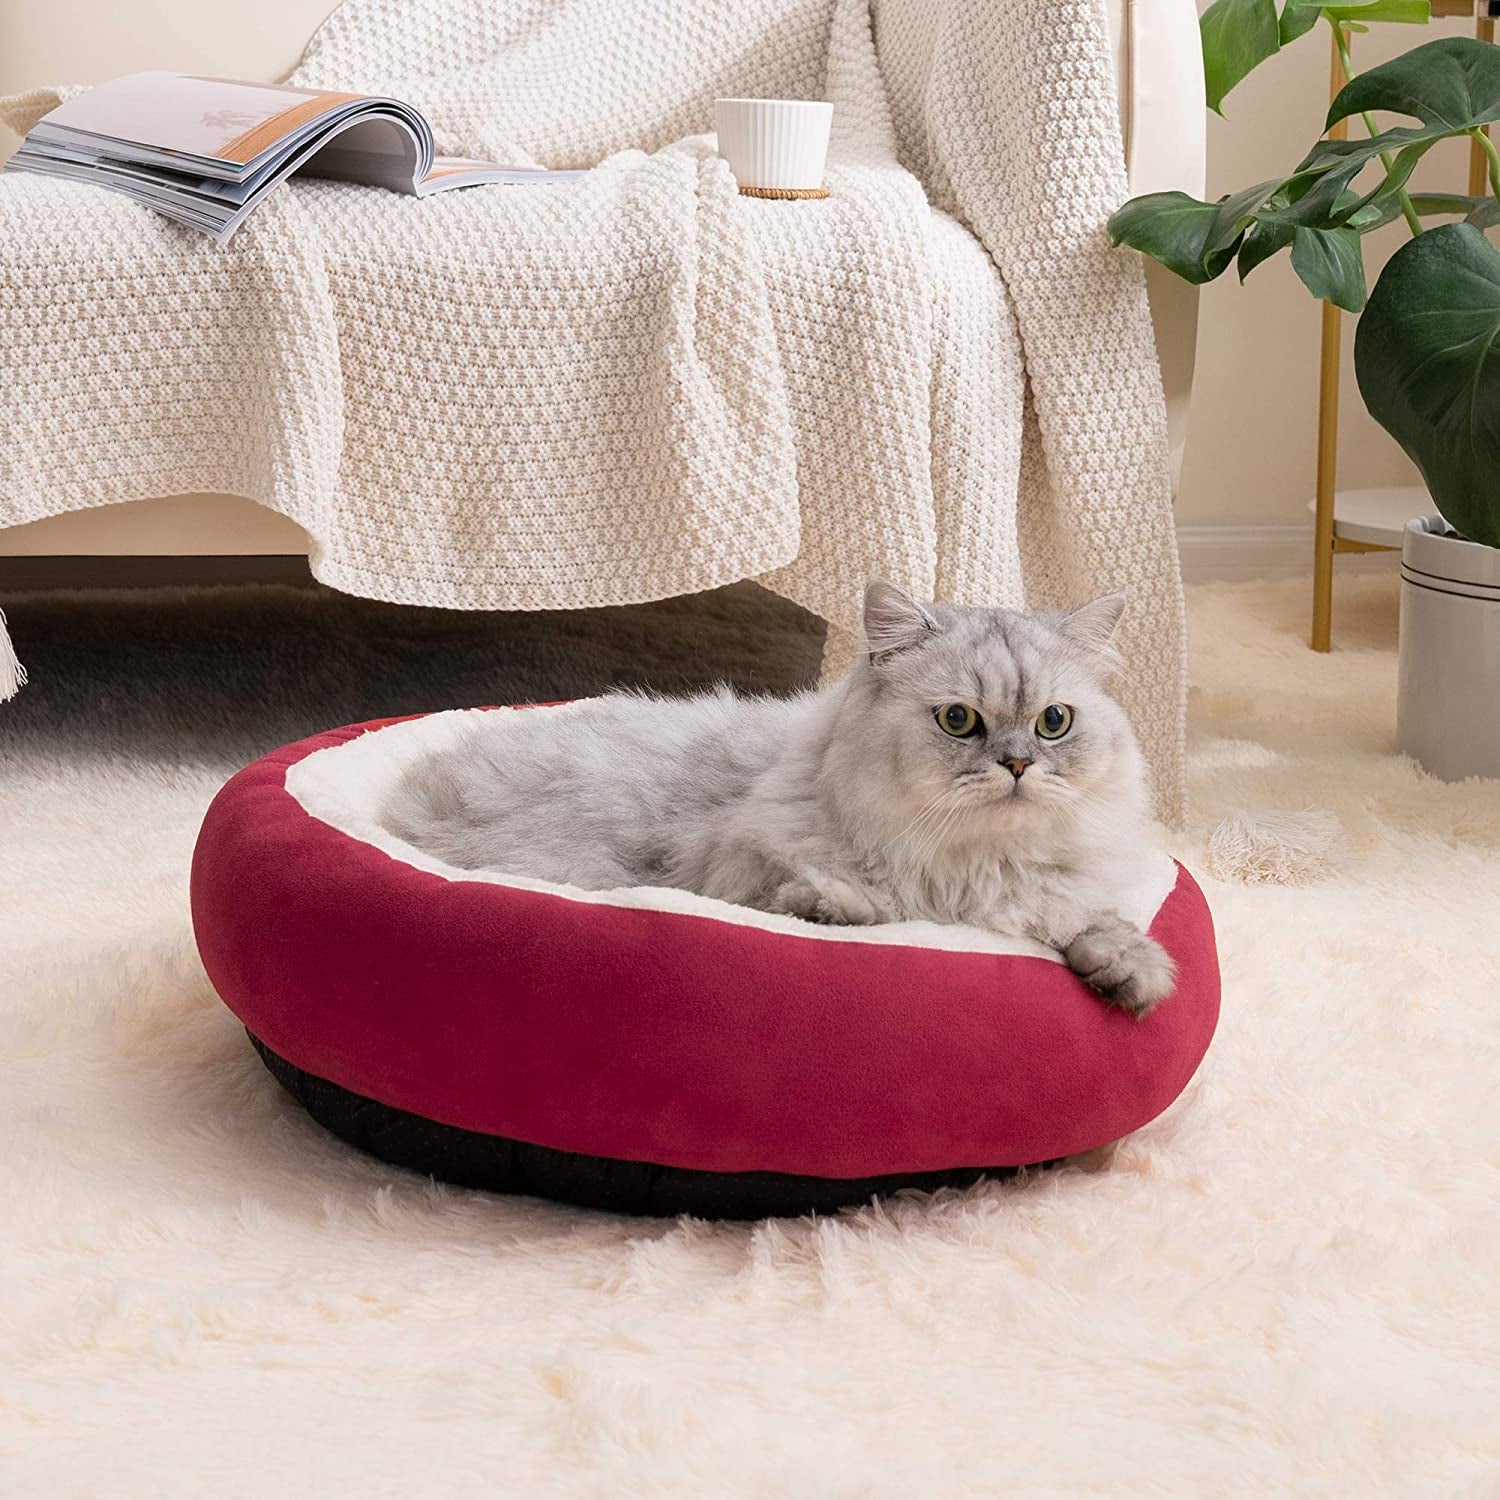 round Donut Cat and Dog Cushion Bed, 20In Pet Bed for Cats or Small Dogs, Anti-Slip & Water-Resistant Bottom, Super Soft Durable Fabric Pet Beds, Washable Luxury Cat & Dog Bed Red